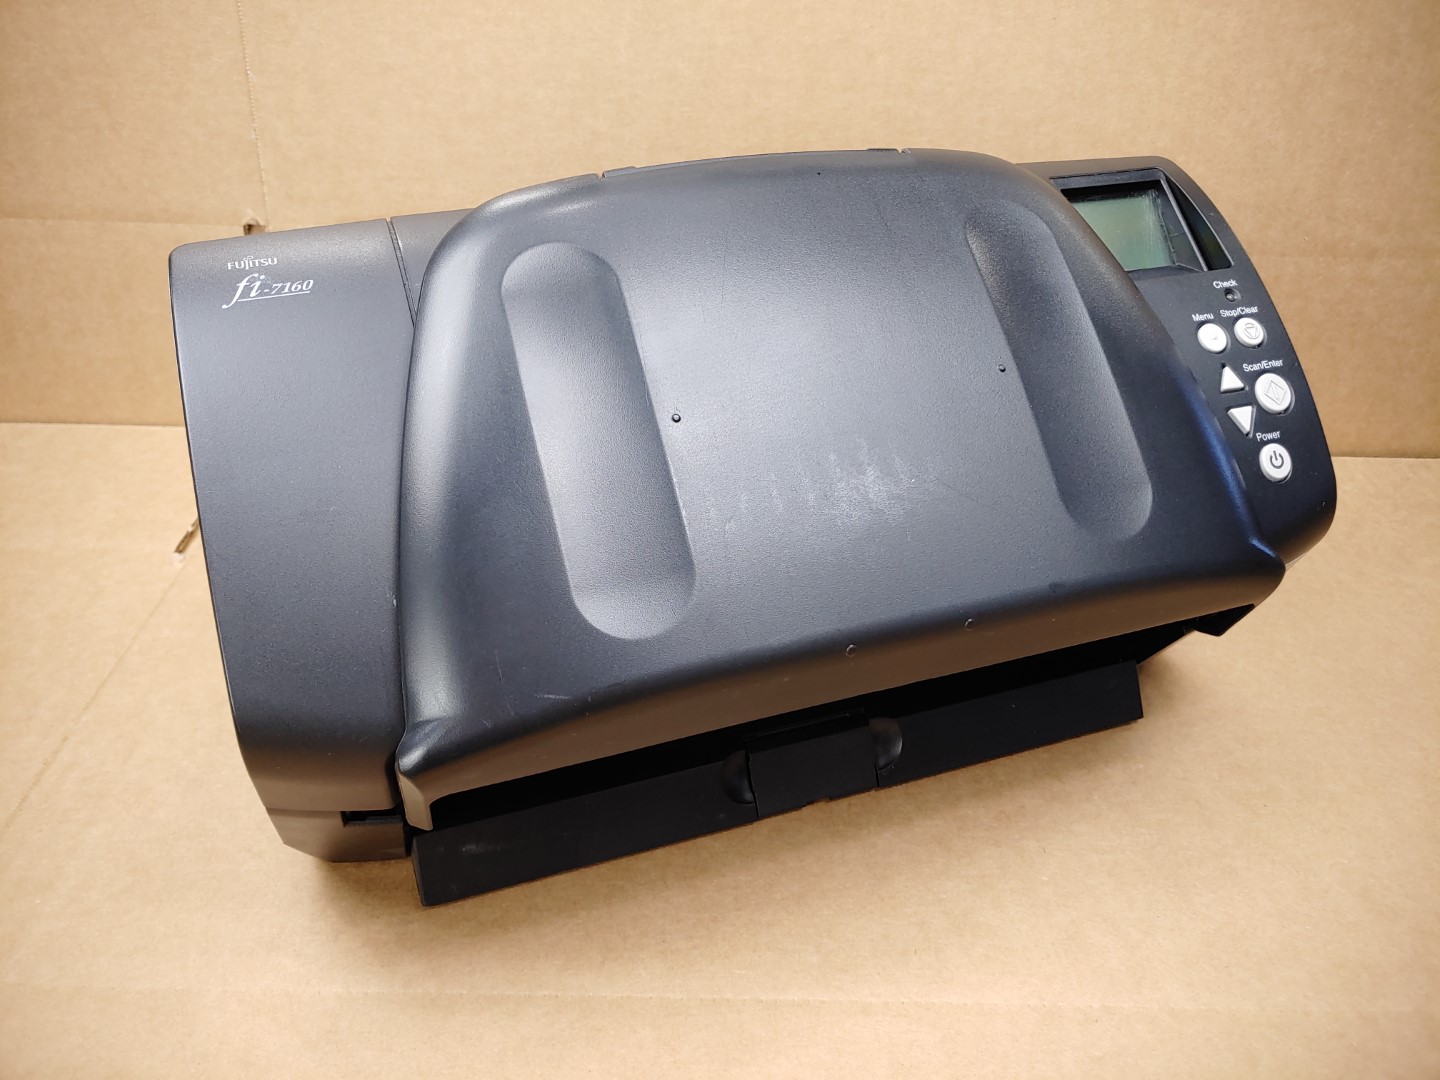 **NO POWER ADAPTER INCLUDED** Scanner pops up an error when it powers on "F4: C2 Error". Overall looks to be in good condition. Missing rear tray. Whats shown in the pictures is what you'll receive. Item Specifics: MPN : fi-7160UPC : N/AType : Sheetfed ScannerBrand : FujitsuModel : fi-7160Scanning Resolution : 600x600 DPIColor Depth : 24 BitGrayscale Depth : 8 BitConnectivity : USB 3.0 - 2